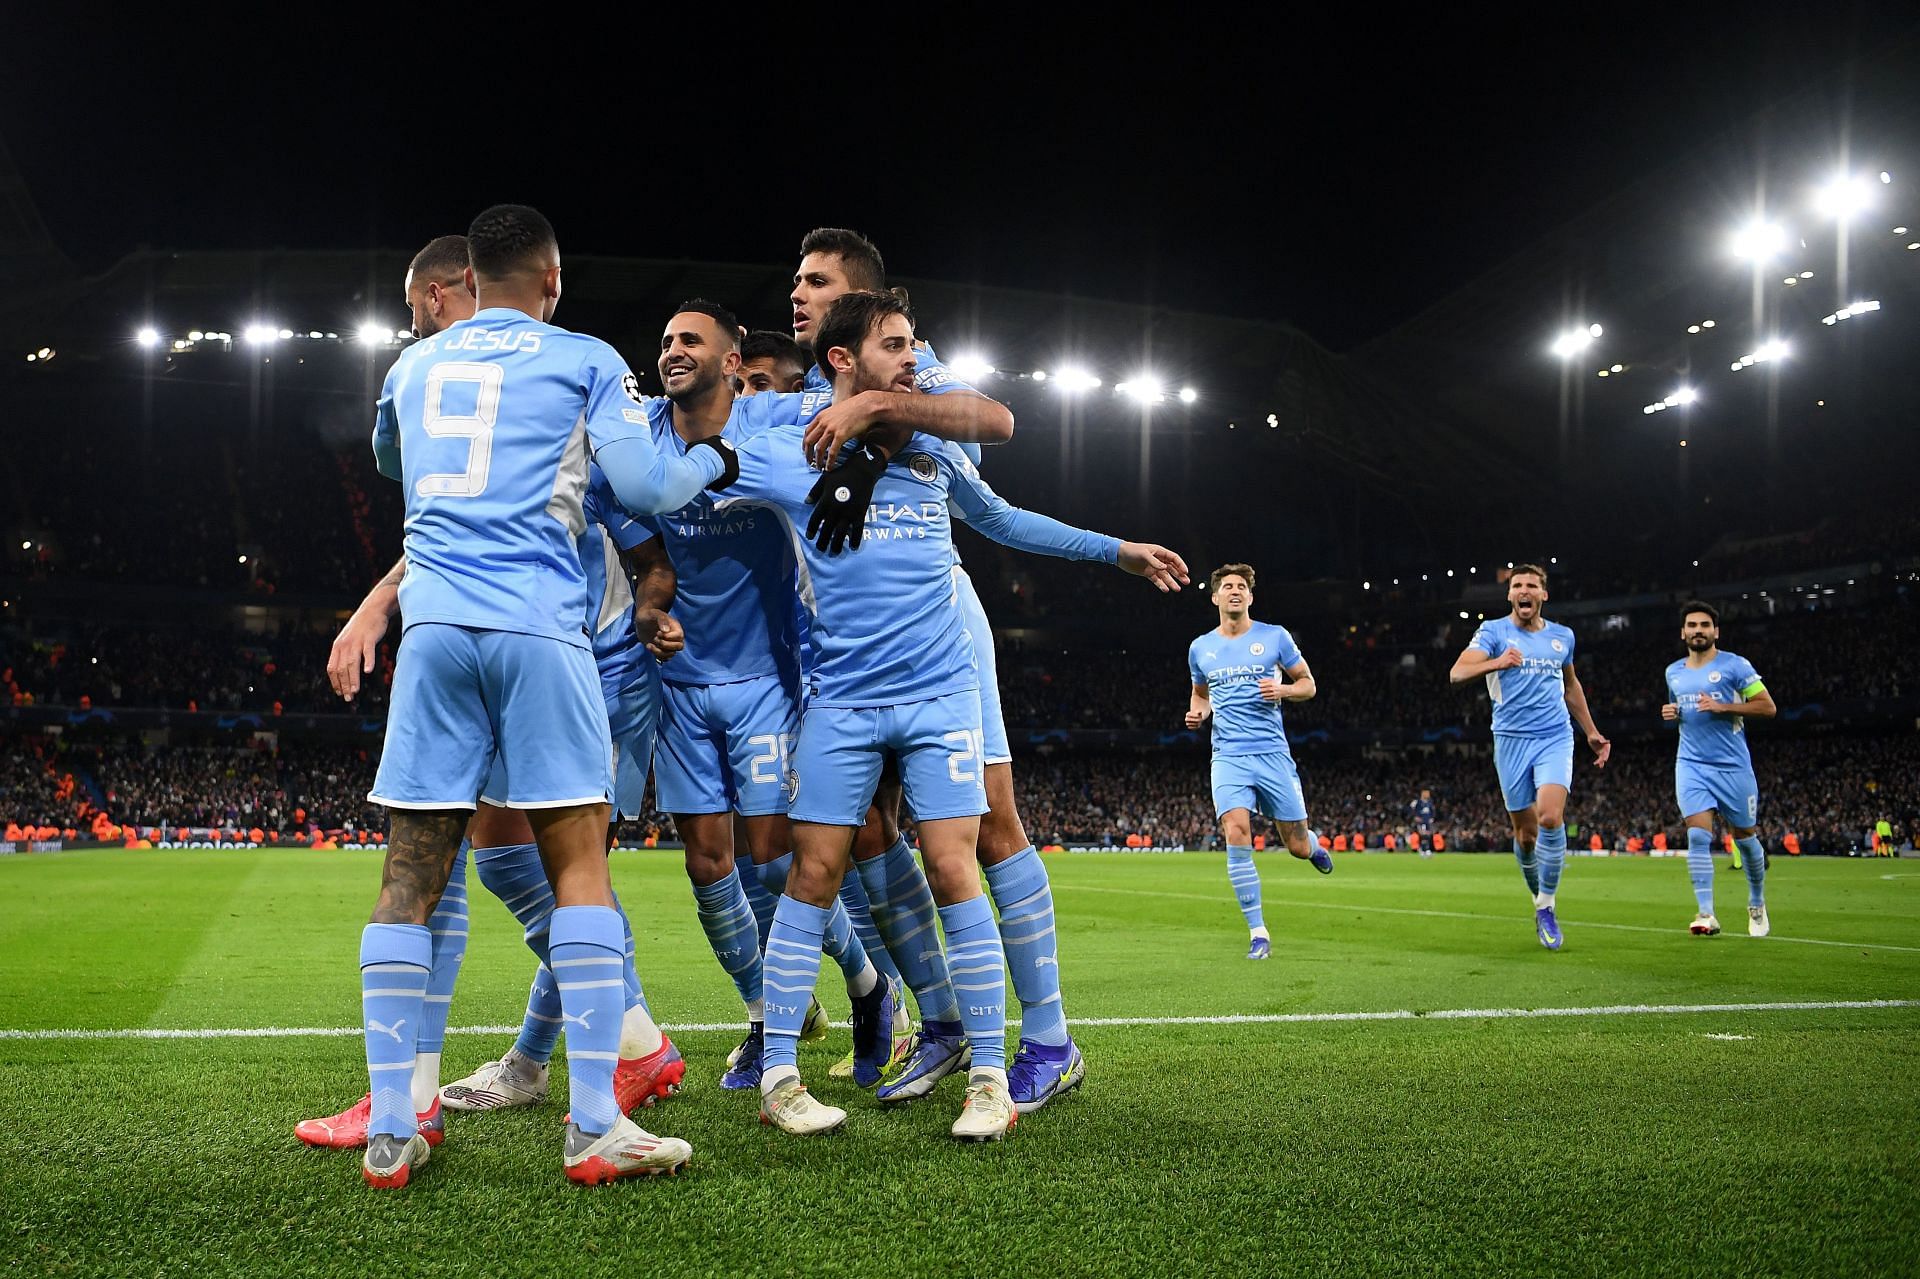 Manchester City are the favourites to win the Premier League title again